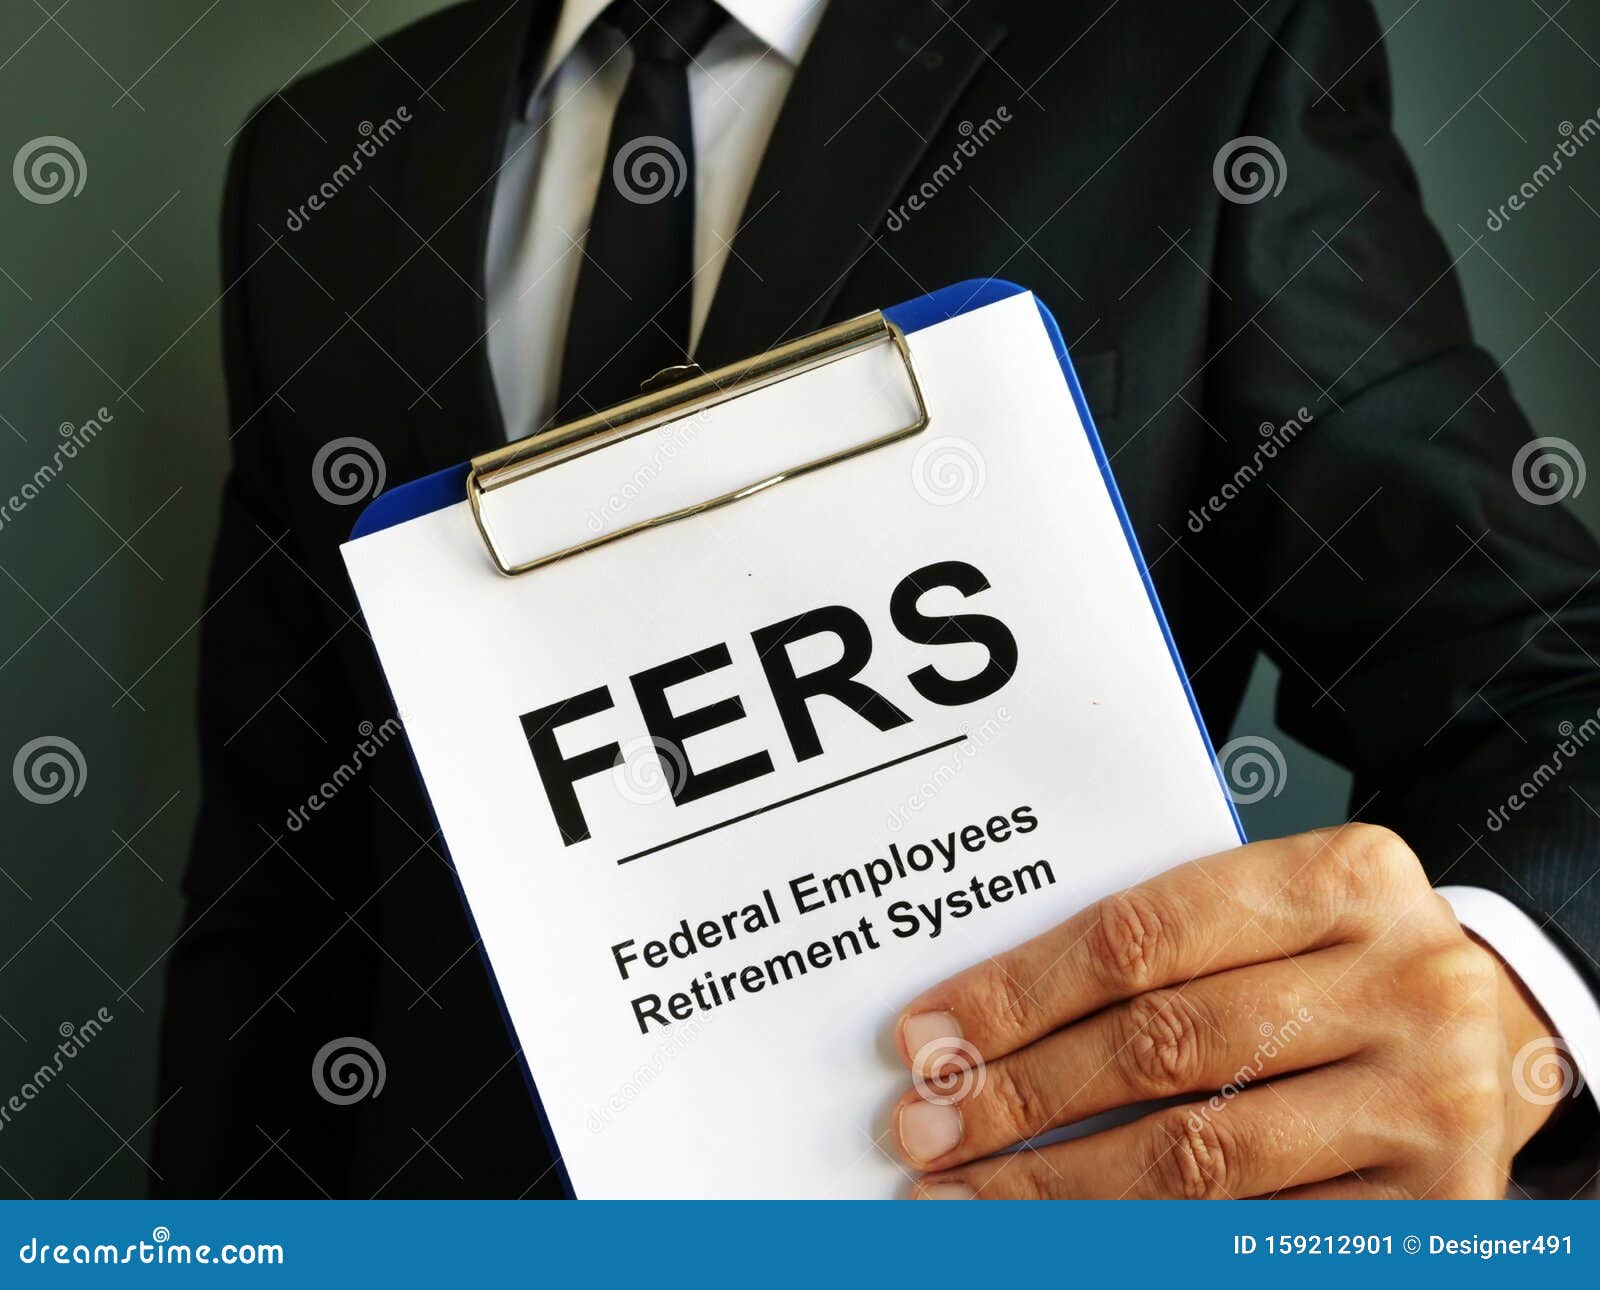 federal employees retirement system fers